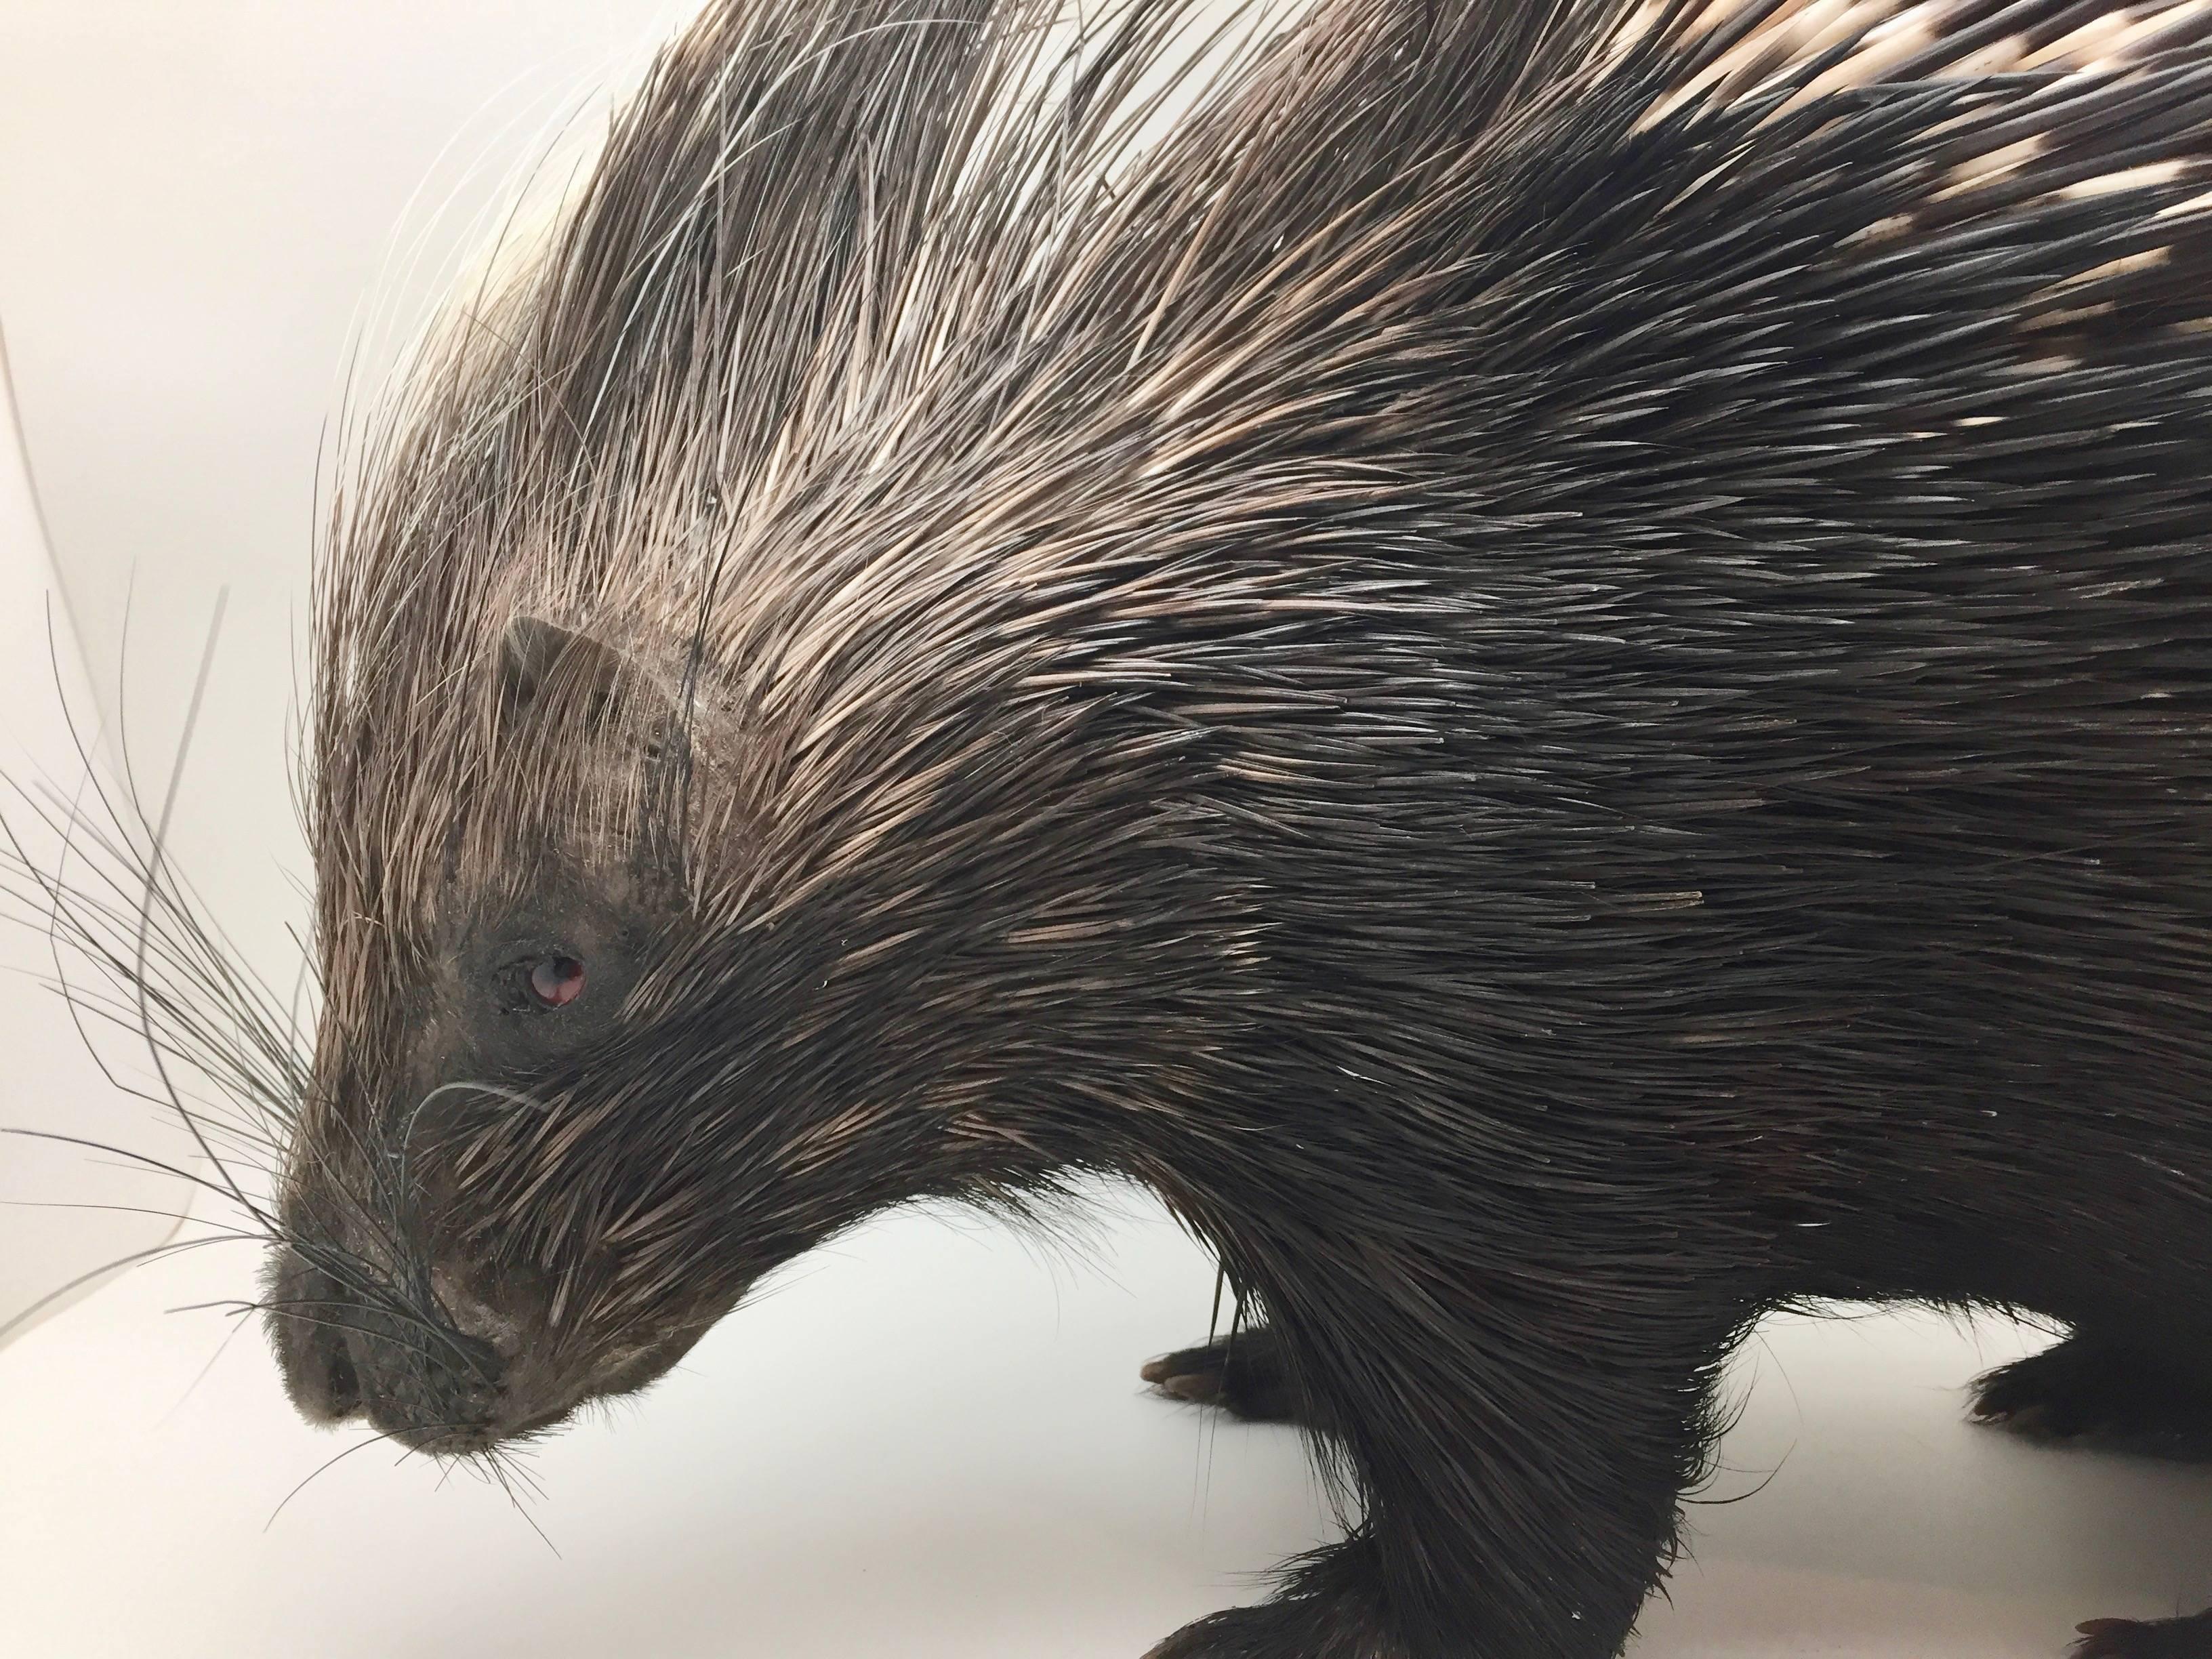 Very large taxidermy crested porcupine from South Africa, scientific name Hystrix cristata. This species is a much larger size than found anywhere else in the world.